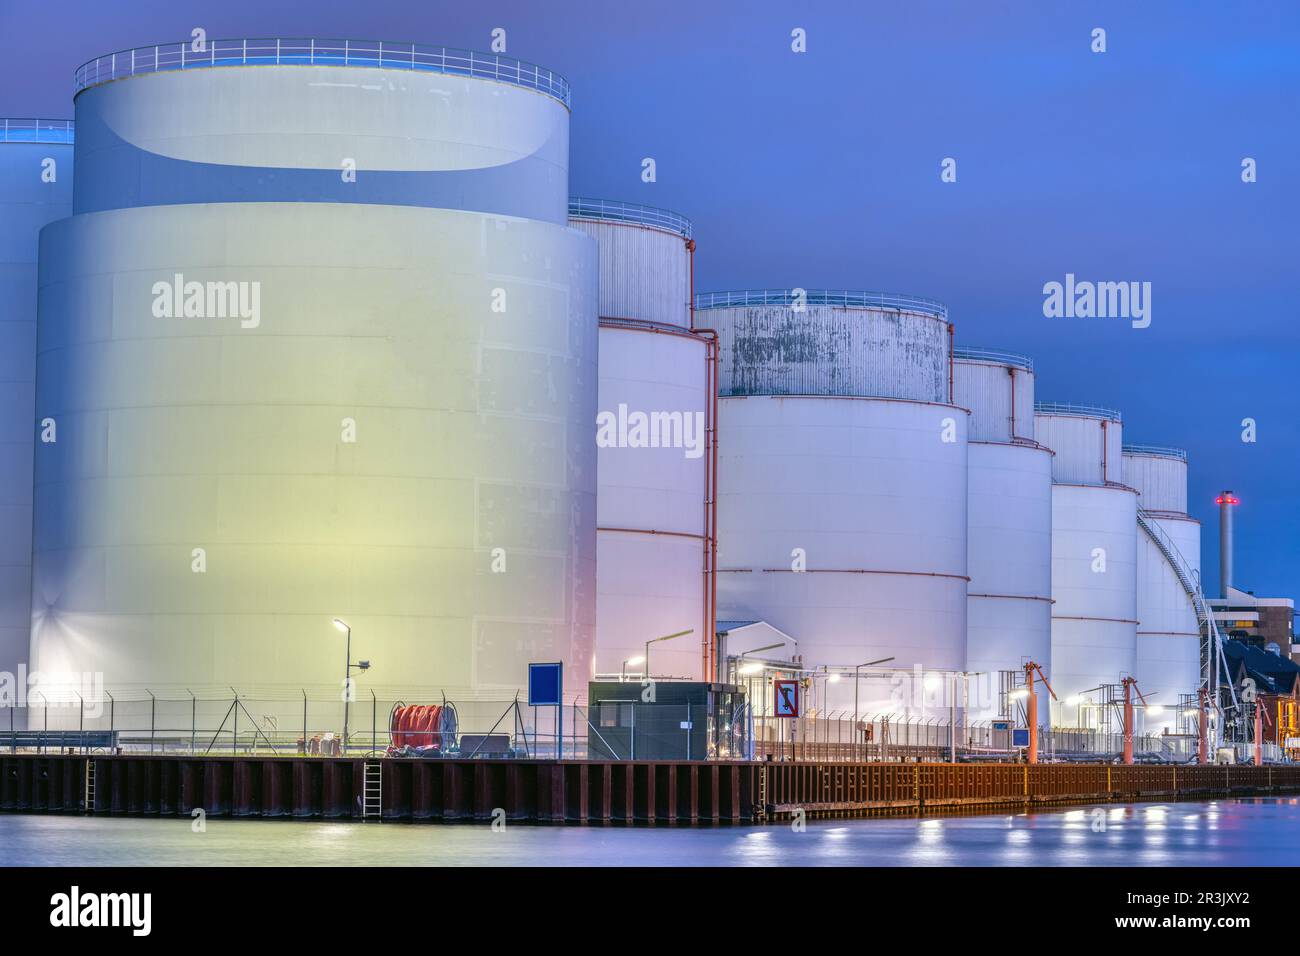 Storage tanks for fossil fuels at night seen in Berlin Stock Photo